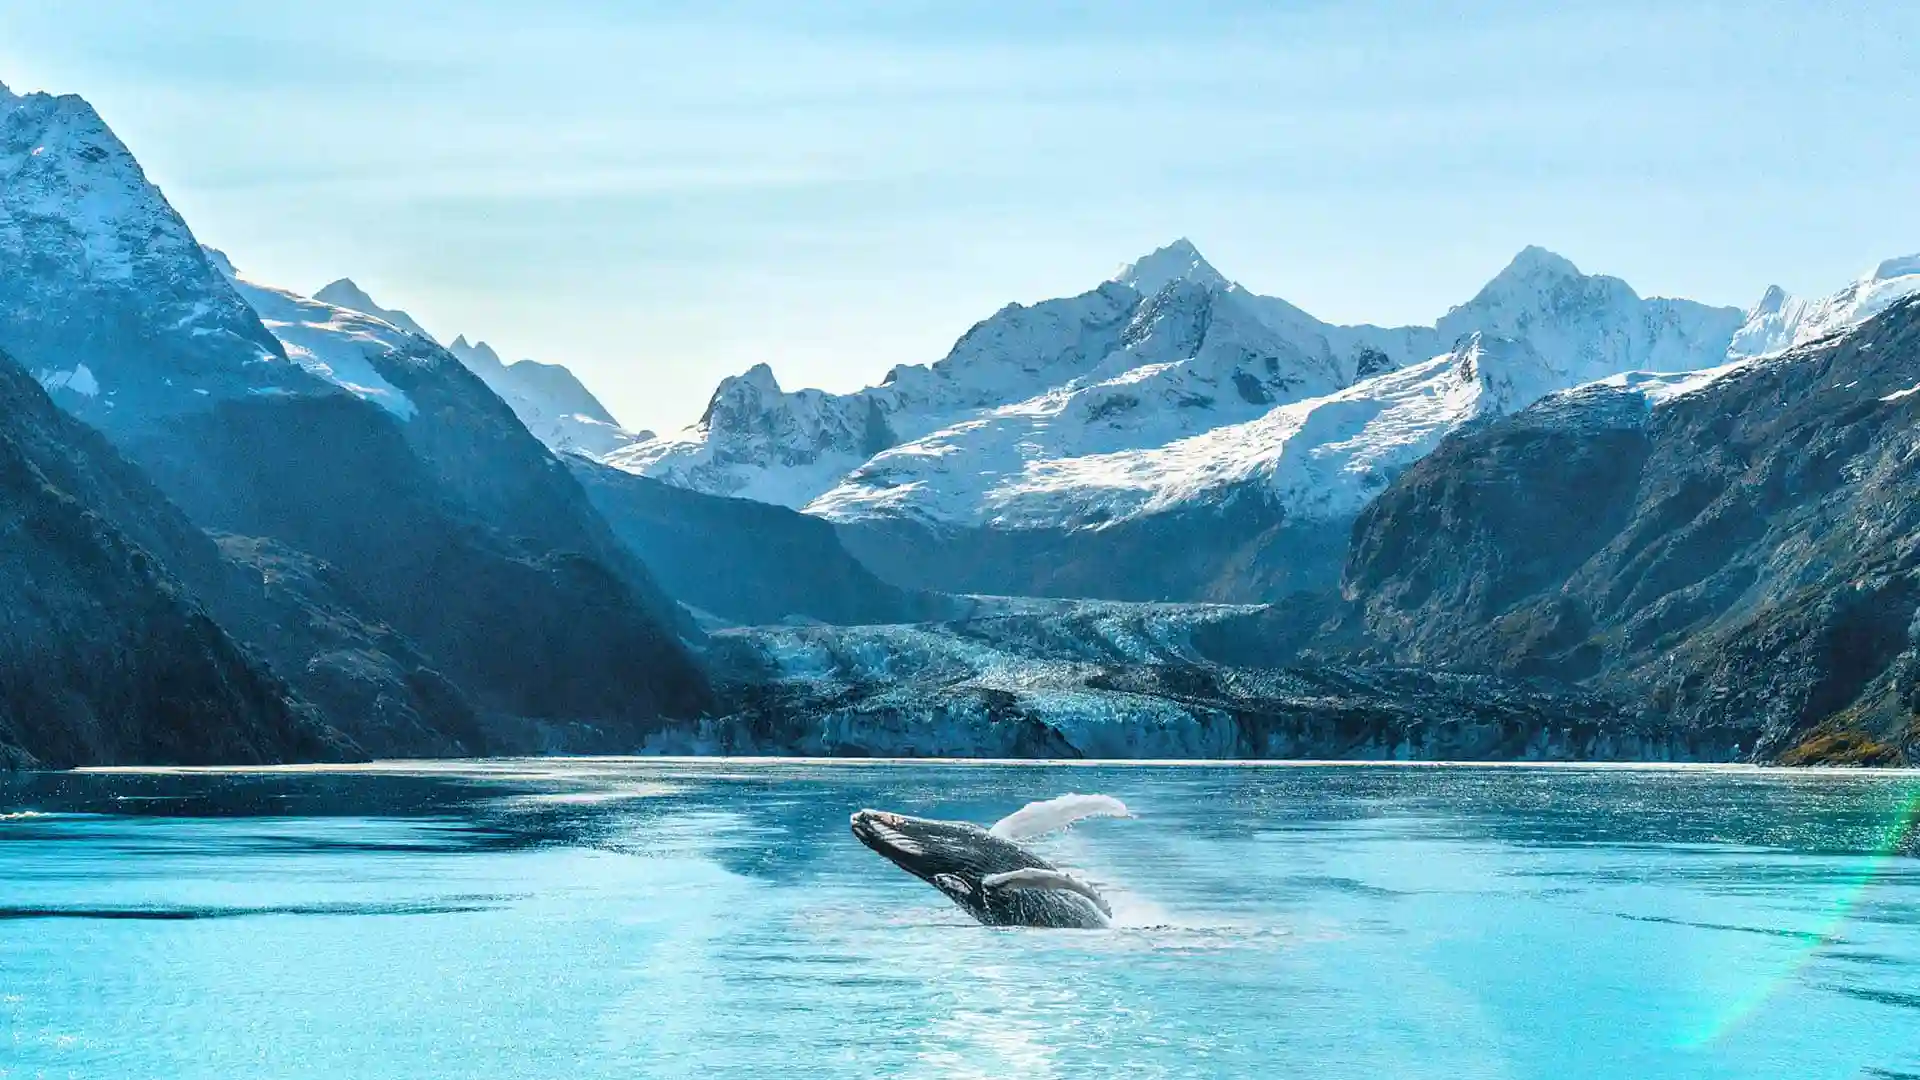 Whale jumping out of water in Glacier Bay, Alaska, surrounded by snowcapped mountains.